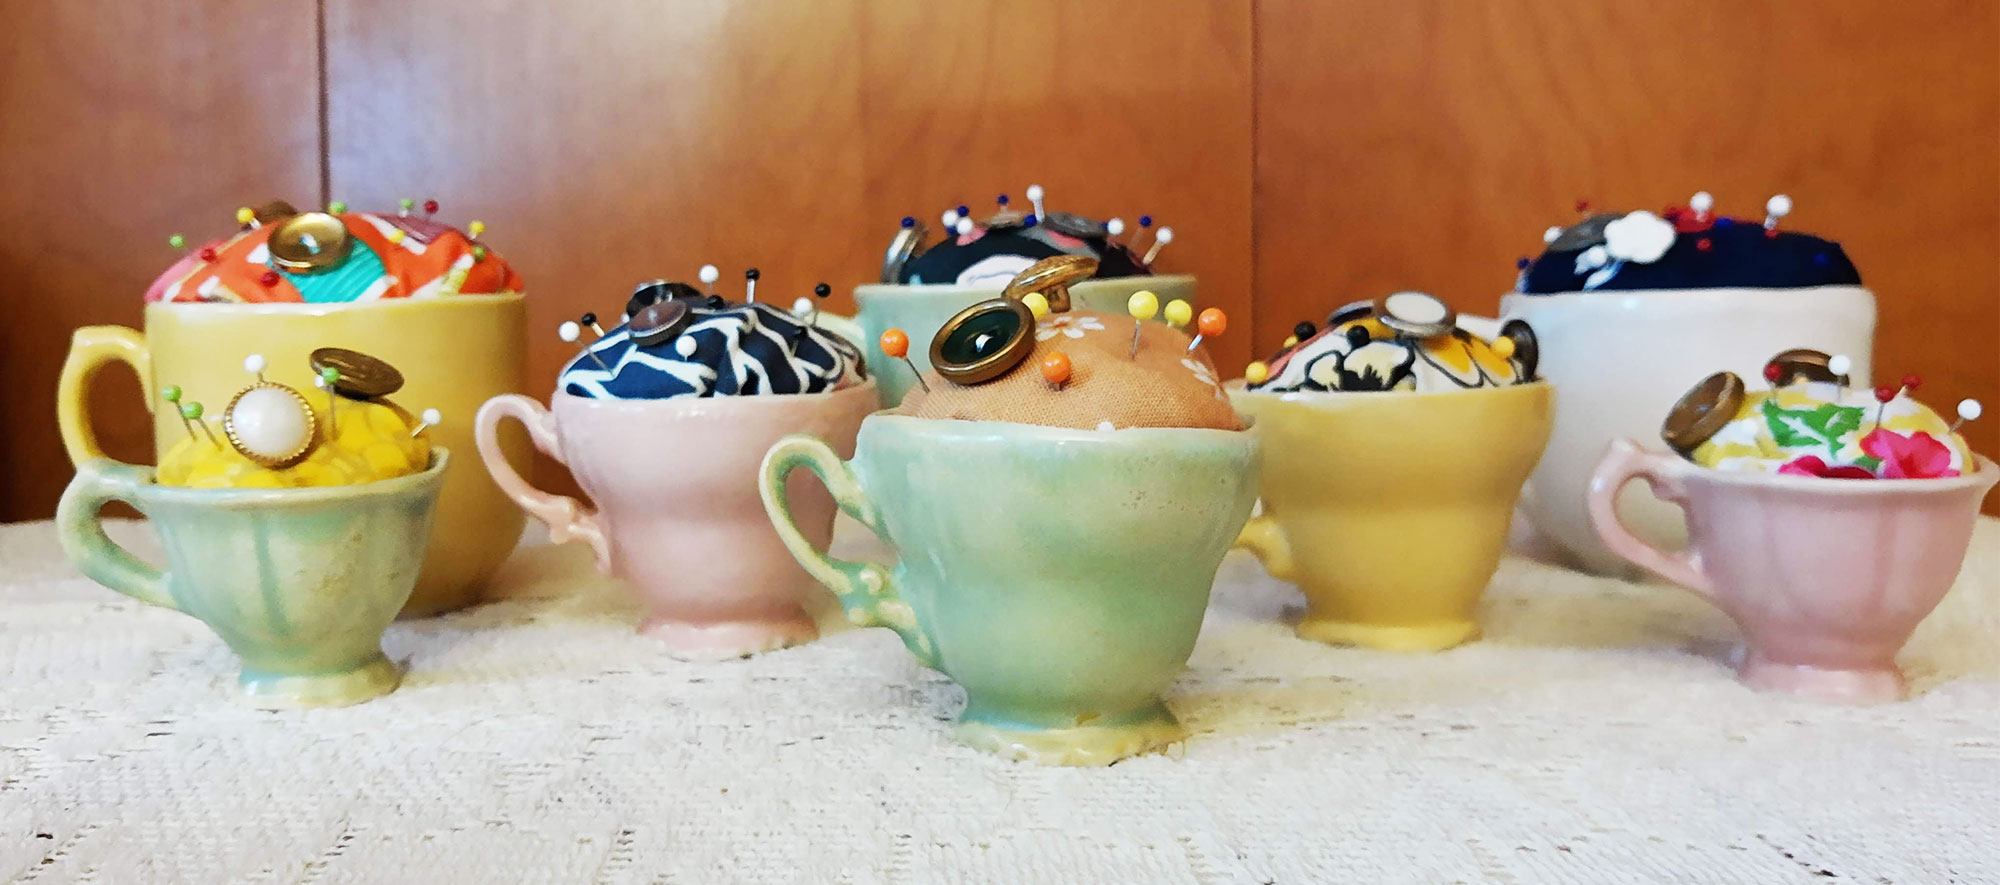 Teacup pincushions by Bethany Prideaux